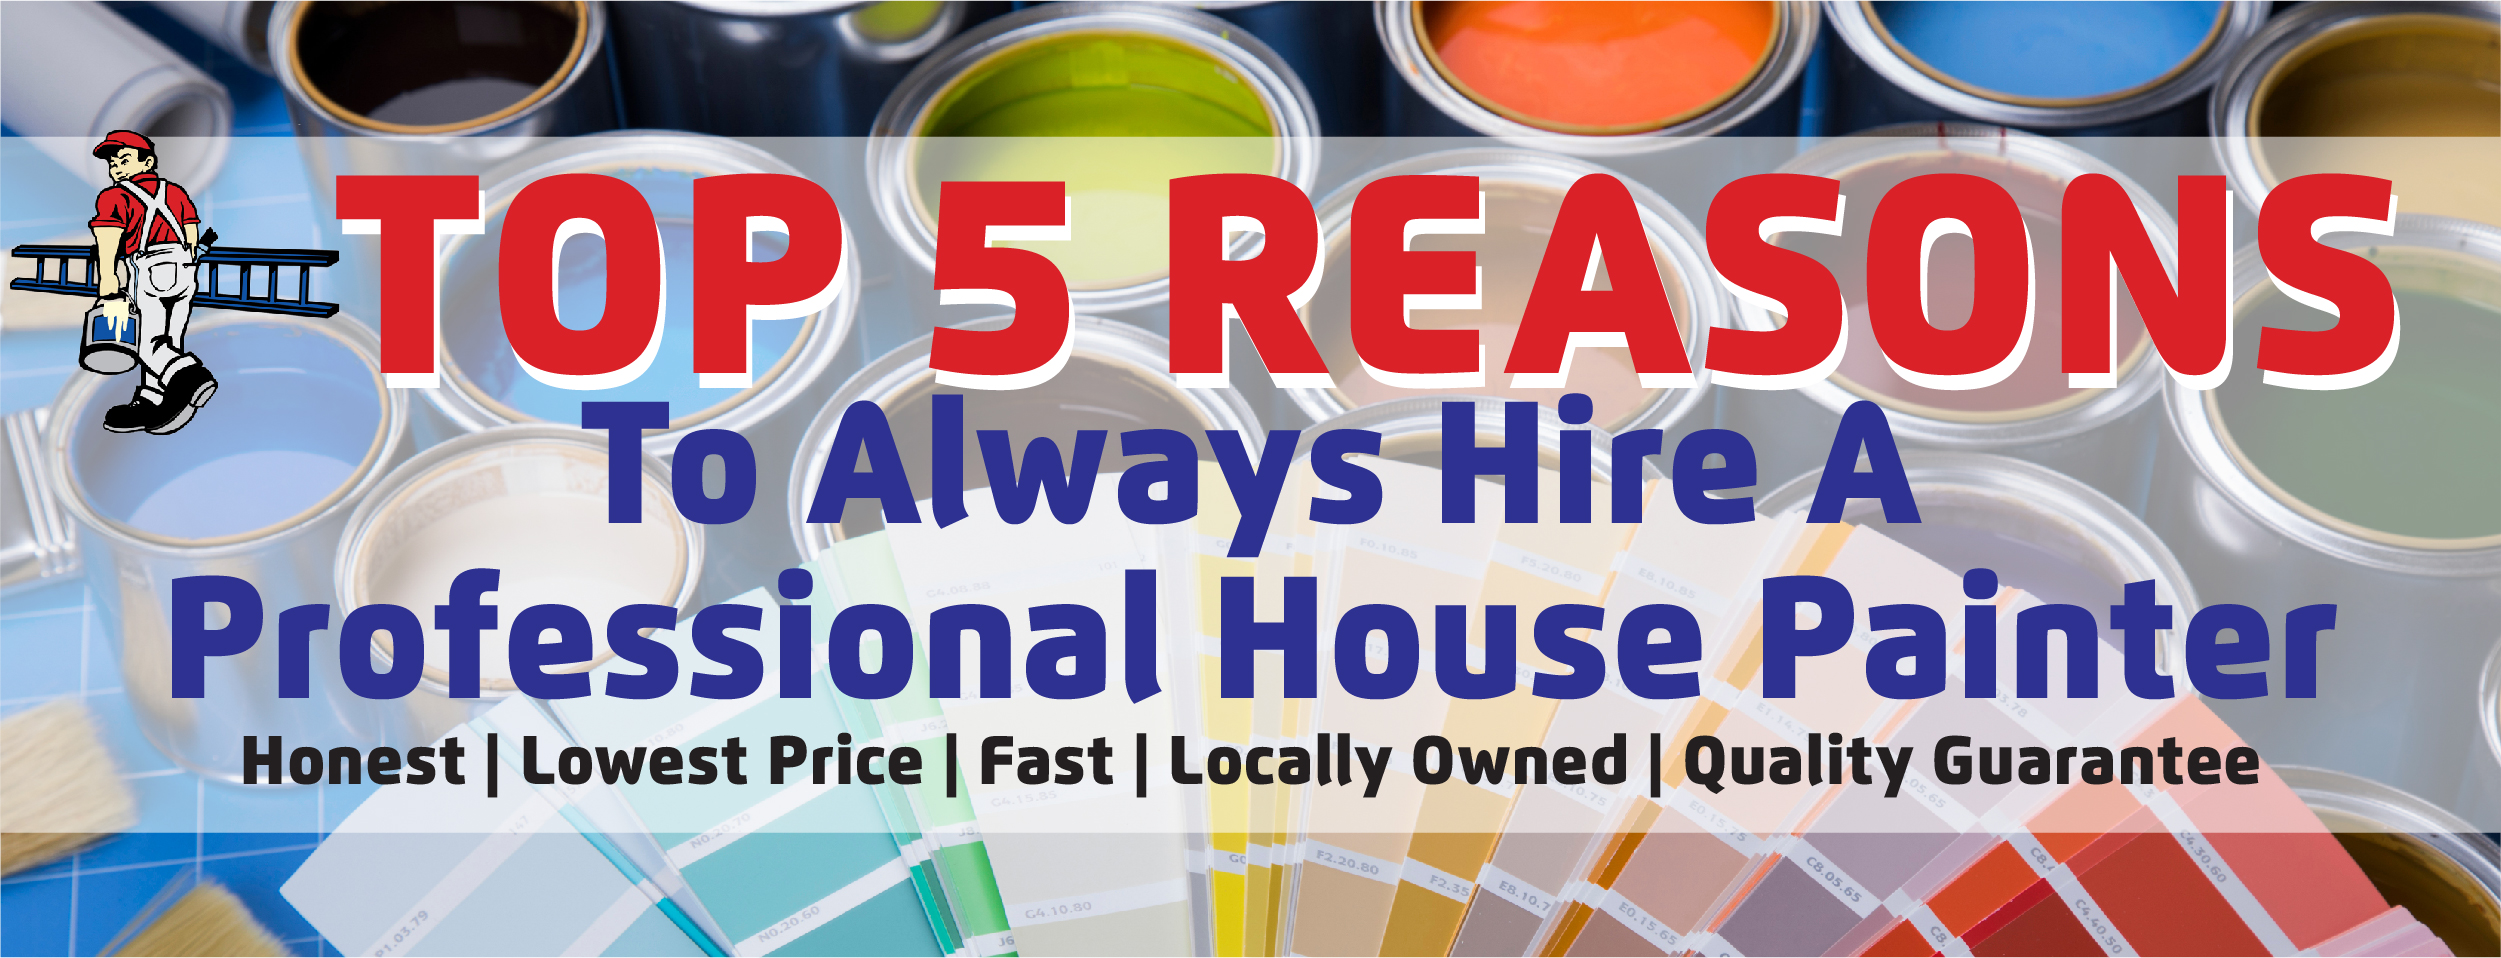 Top 5 Reasons To Hire A Professional House Painter